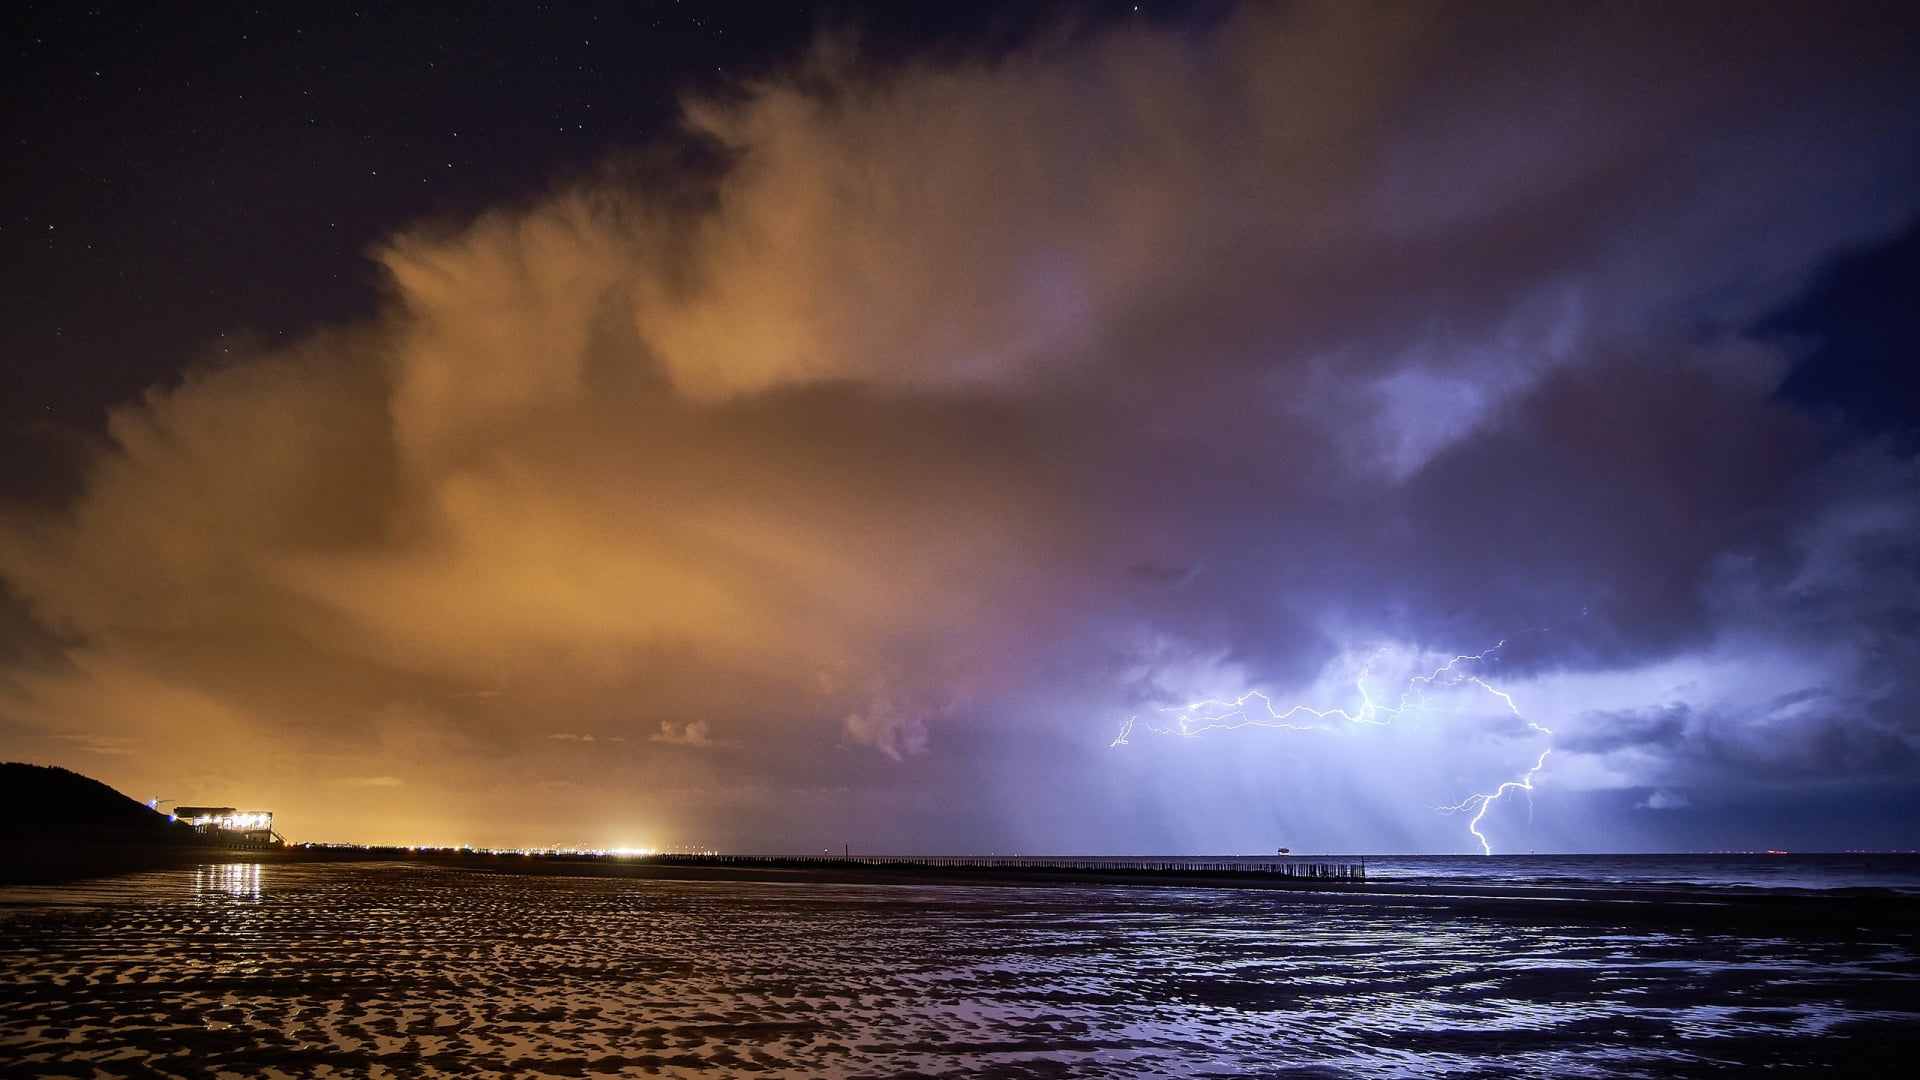 thunderstorm and clouds, nature, landscape, water, beach, sea